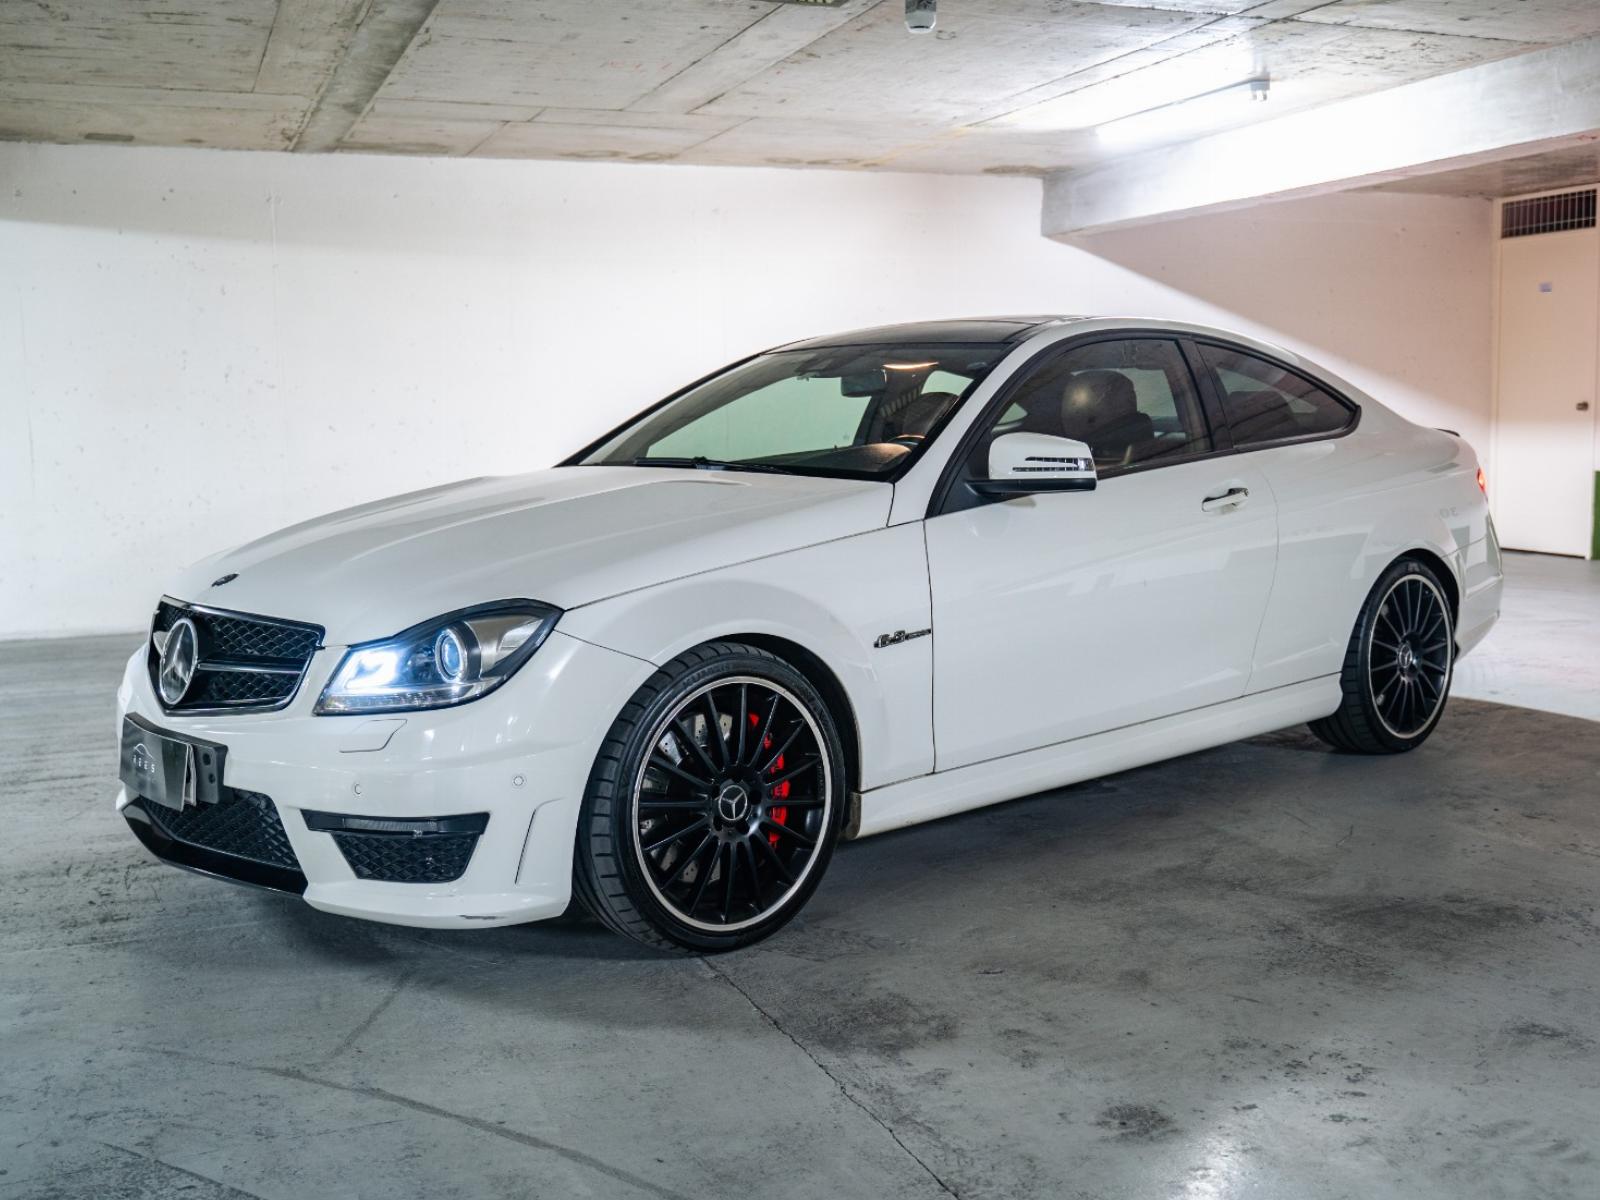 MERCEDES-BENZ C63 AMG Coupe 2013 6.2 LTS - 457 HP - FULL MOTOR